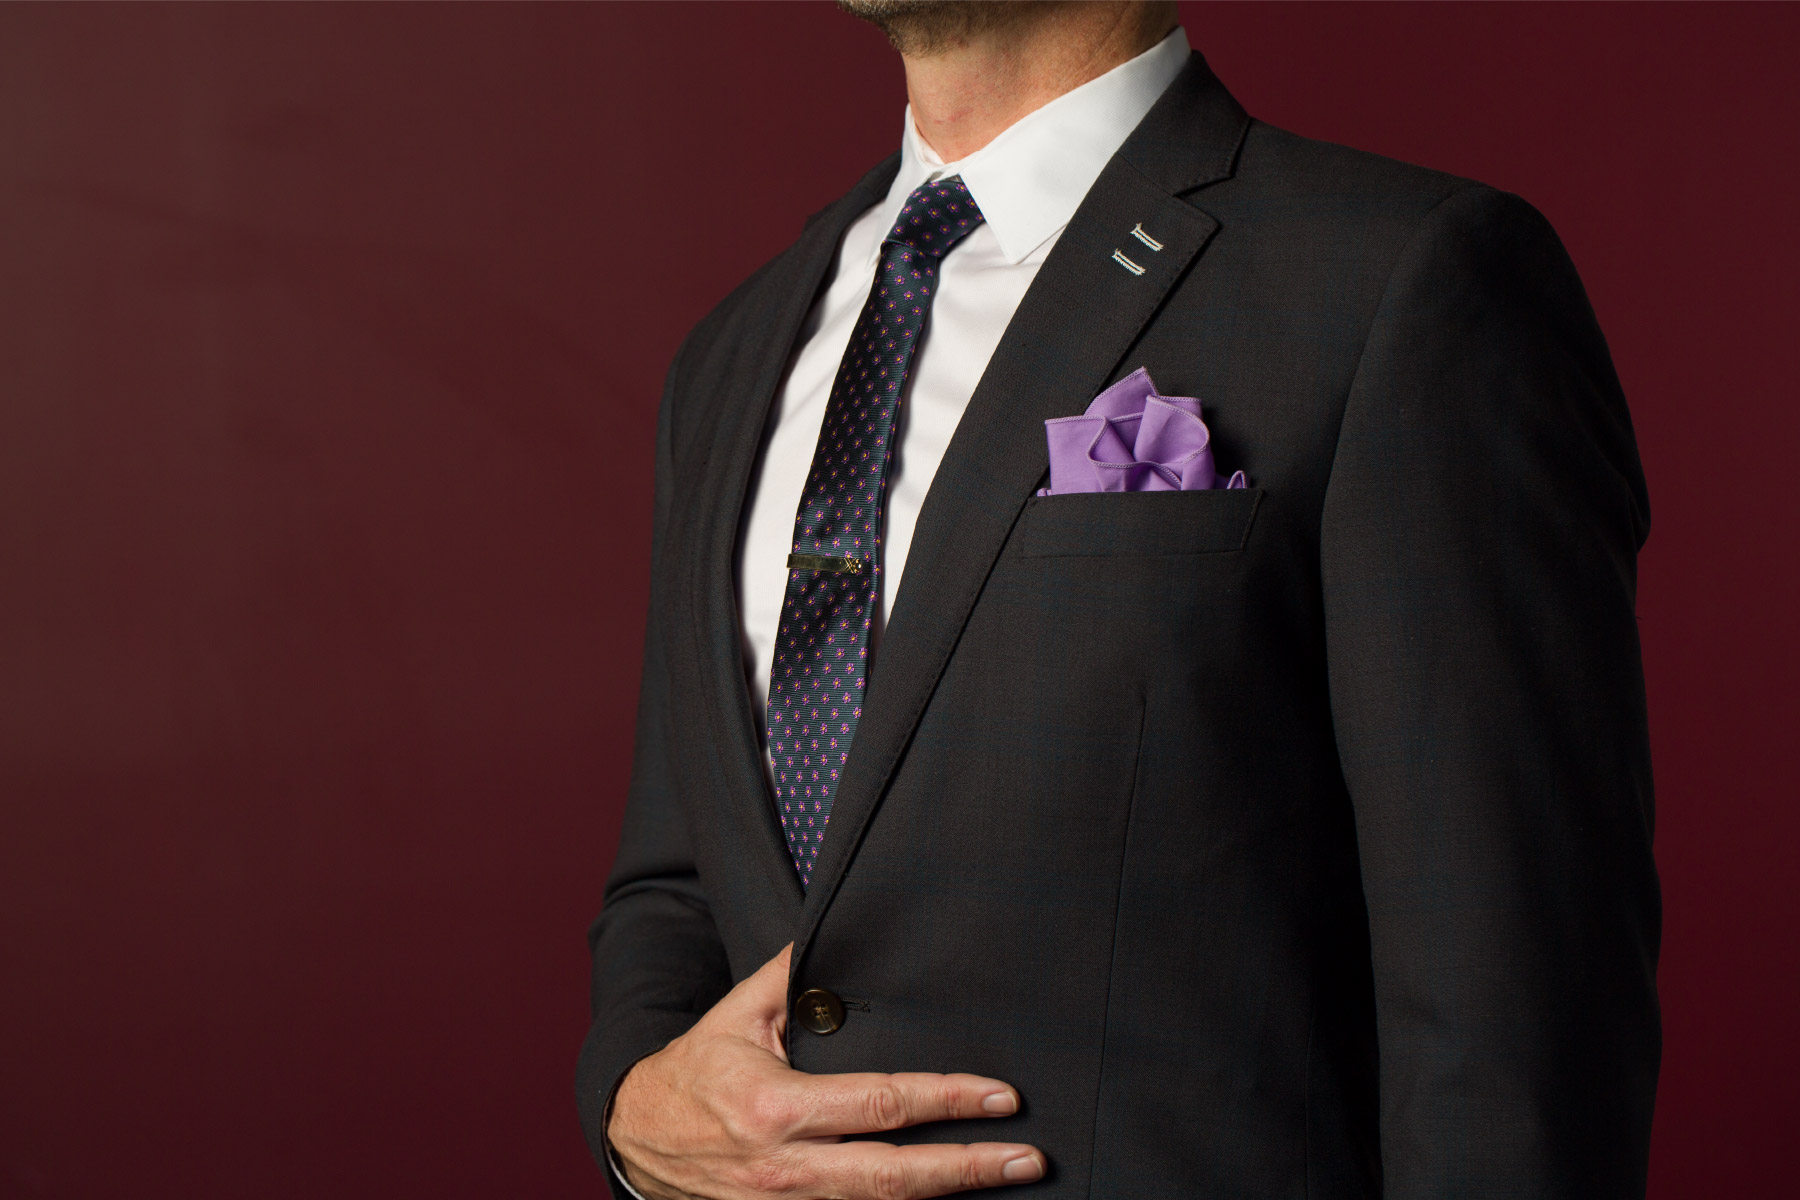 Fuze-Branding-Evolution-Of-Style-Small-Business-Client-Model-Lifestyle-Product-Photography-Bespoke-Suiting-Lavendar-Accessories-Jewel Tone-Background